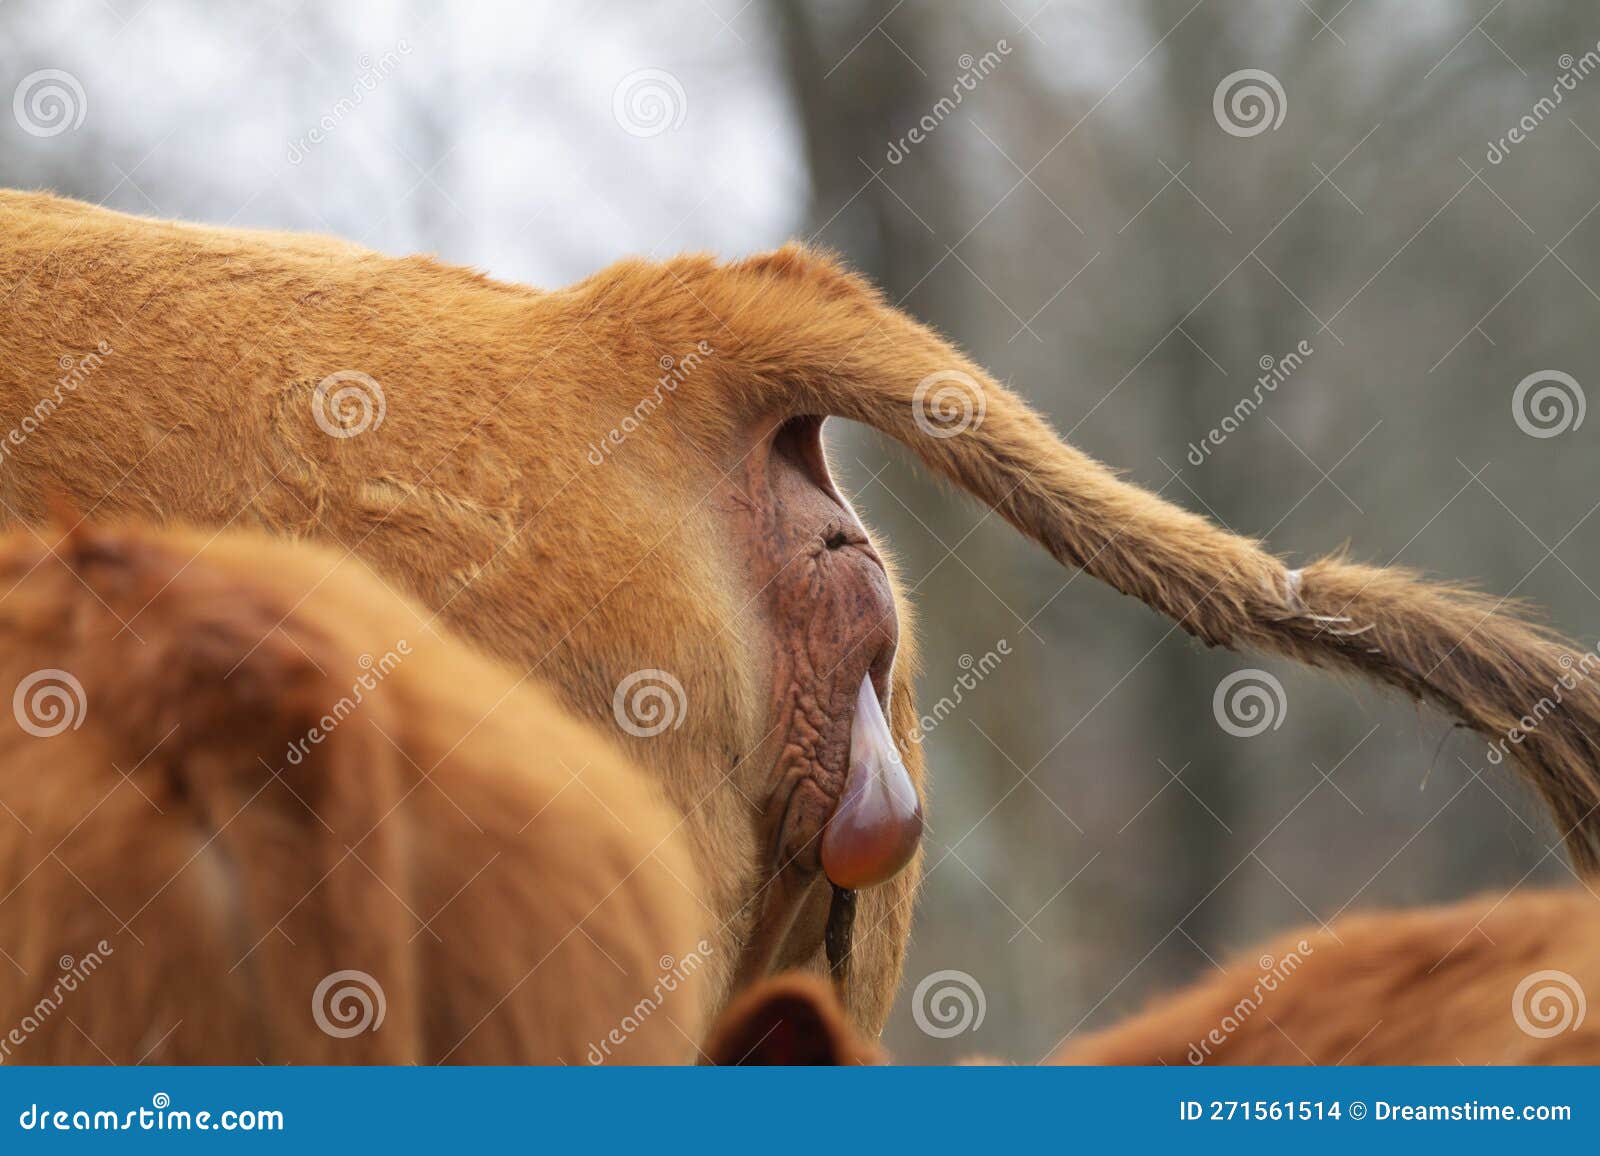 Cow Giving Birth Beginning Stages Stock Photo Image Of Calf Stages